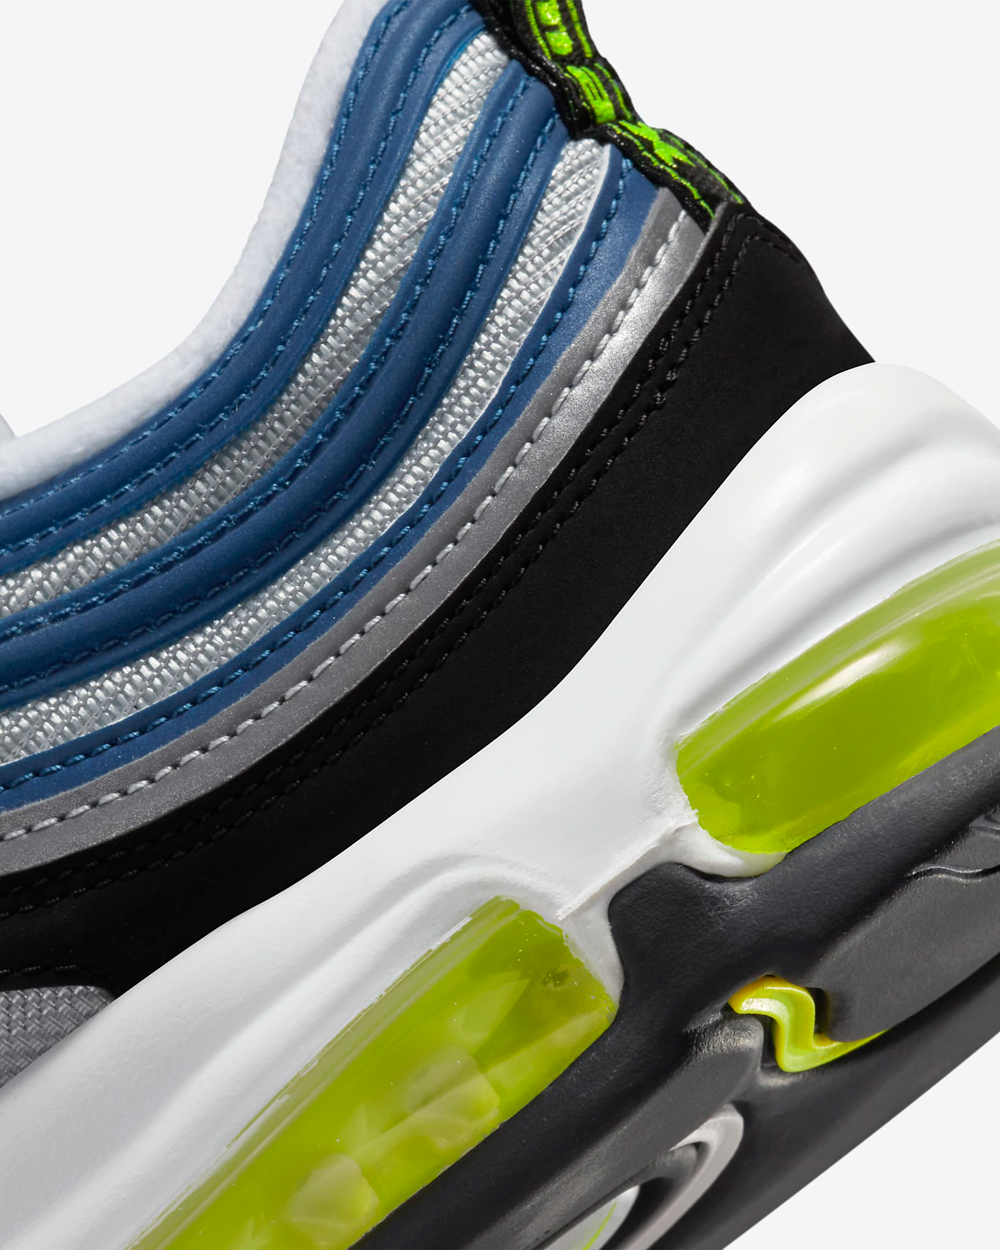 nike-air-max-97-atlantic-blue-voltage-yellow-release-date-info-8